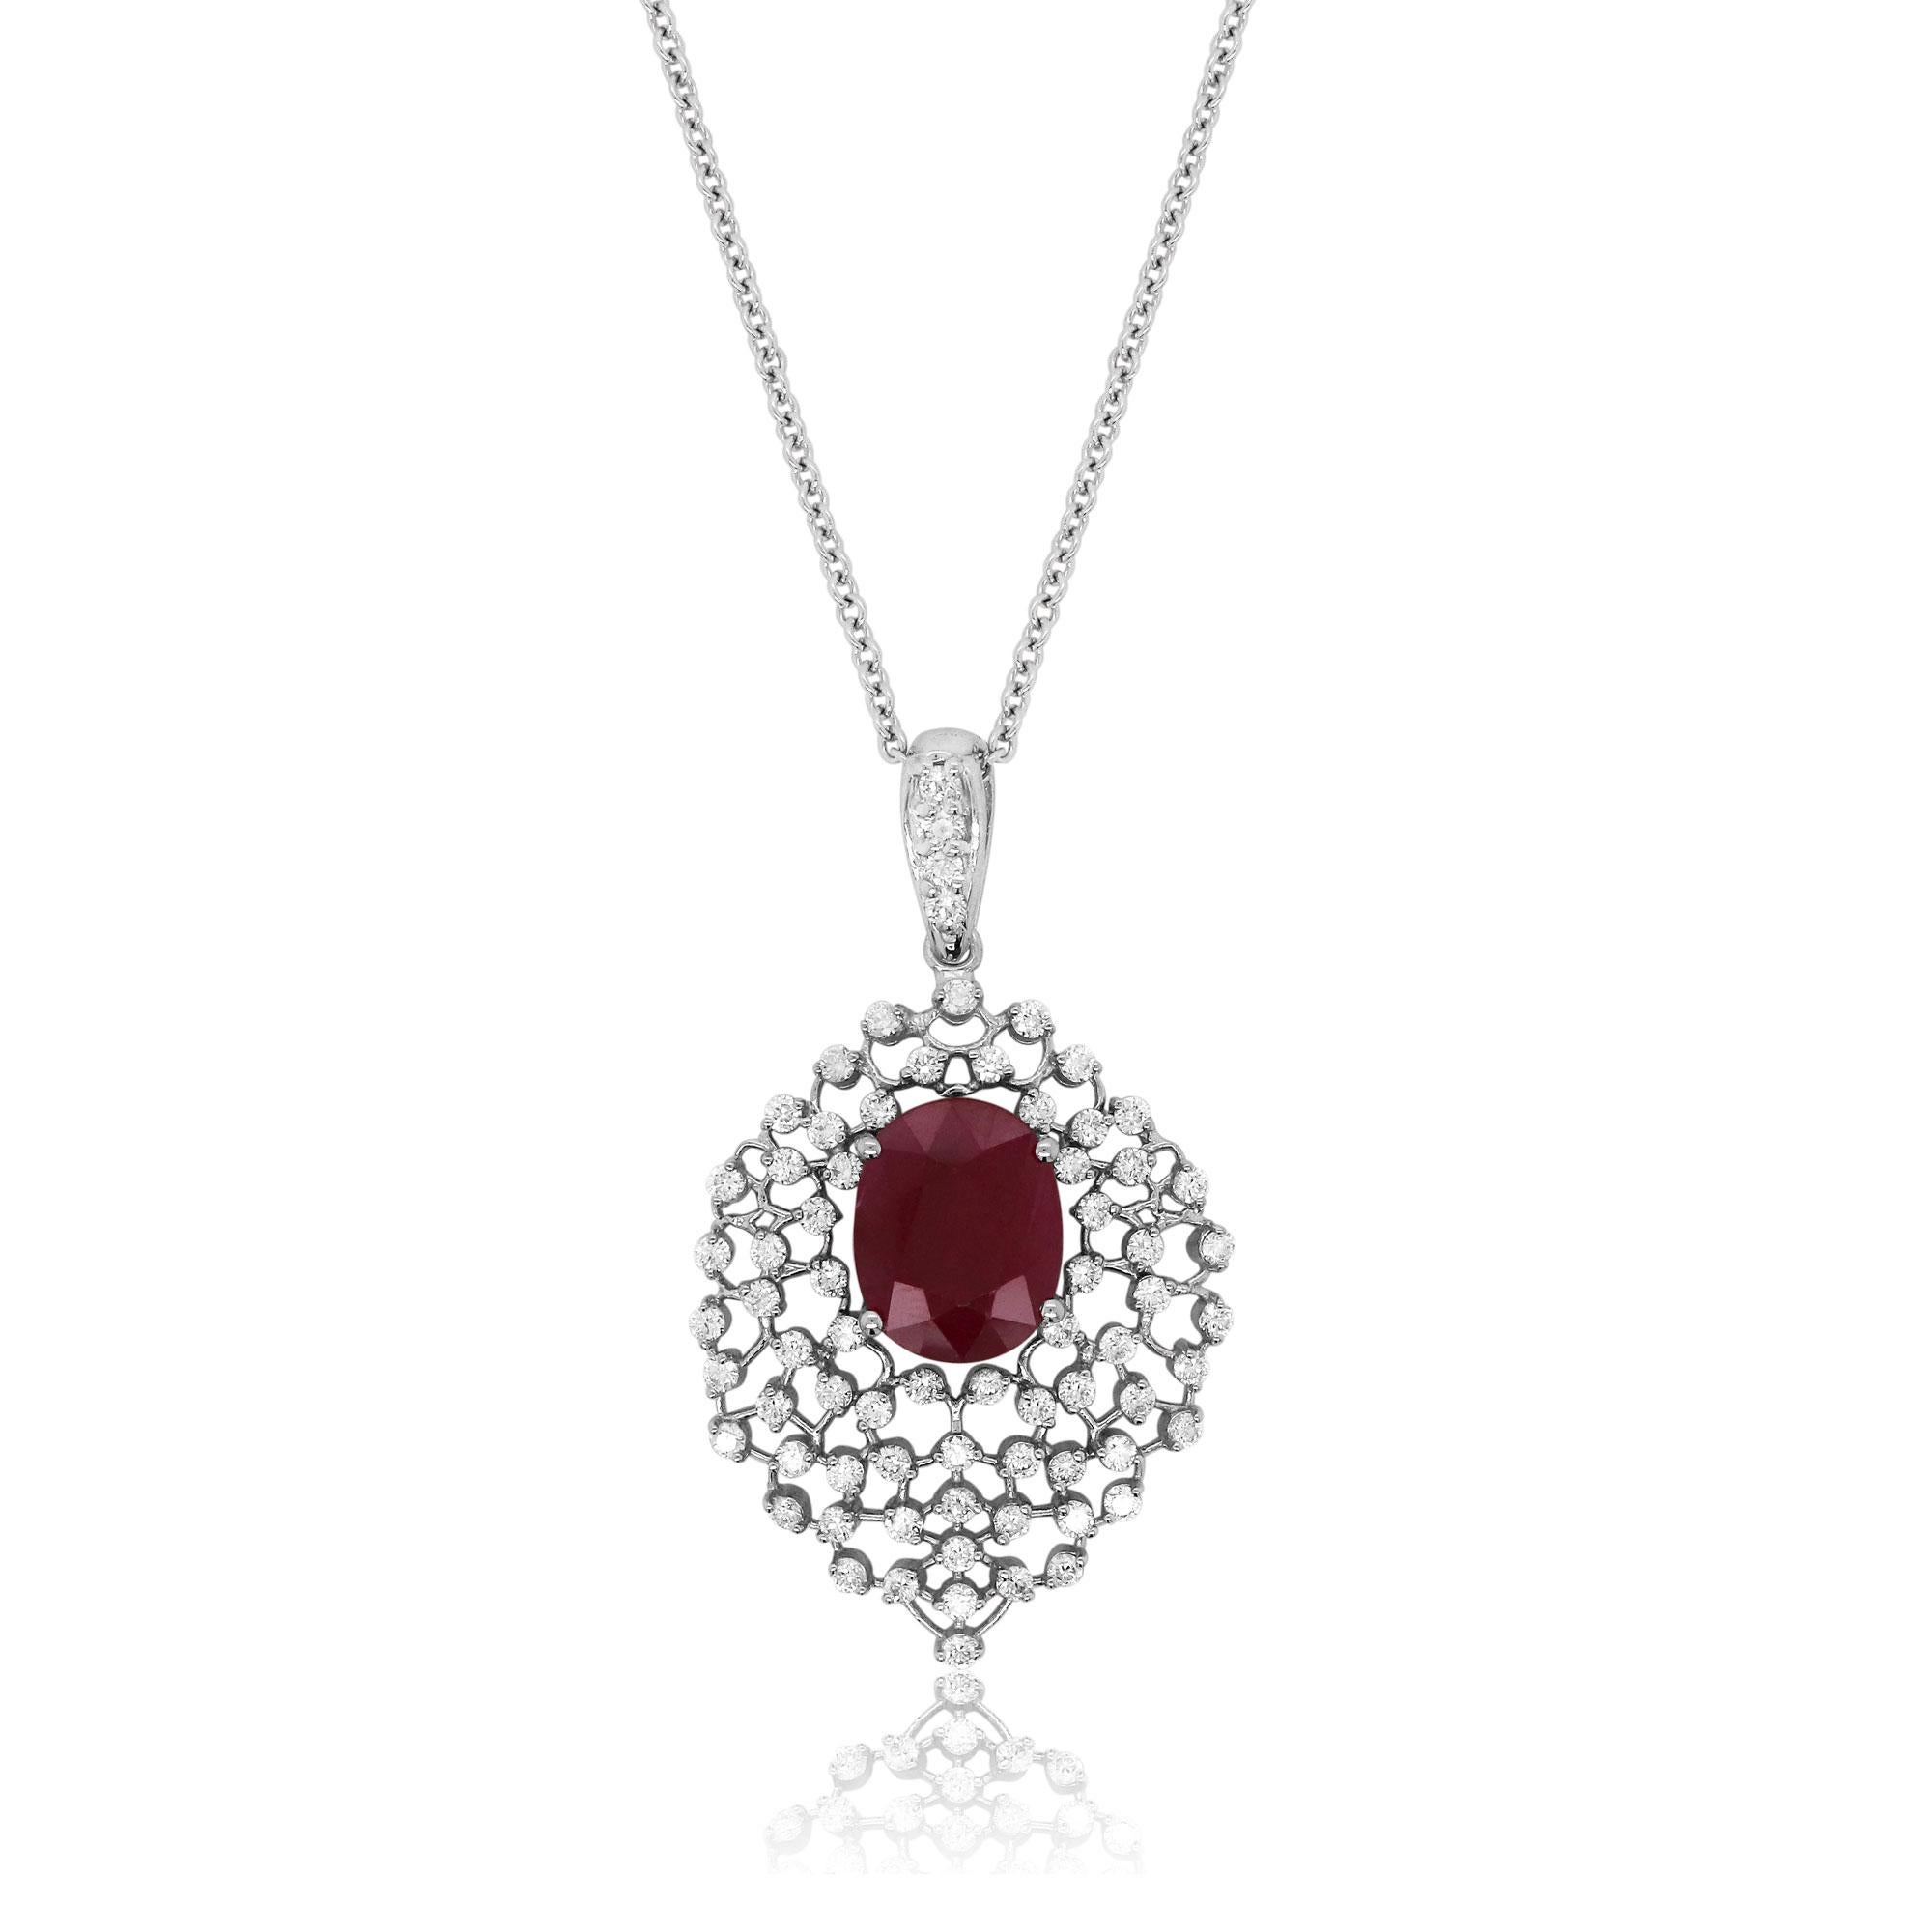 14K White Gold
1 Oval Shaped Ruby at 4.53 Carats
70 Brilliant Round White Diamonds at 1.20 Carats - Clarity: SI / Color: H-I

Fine one-of-a-kind craftsmanship meets incredible quality in this breathtaking piece of jewelry. 

All pieces are made in